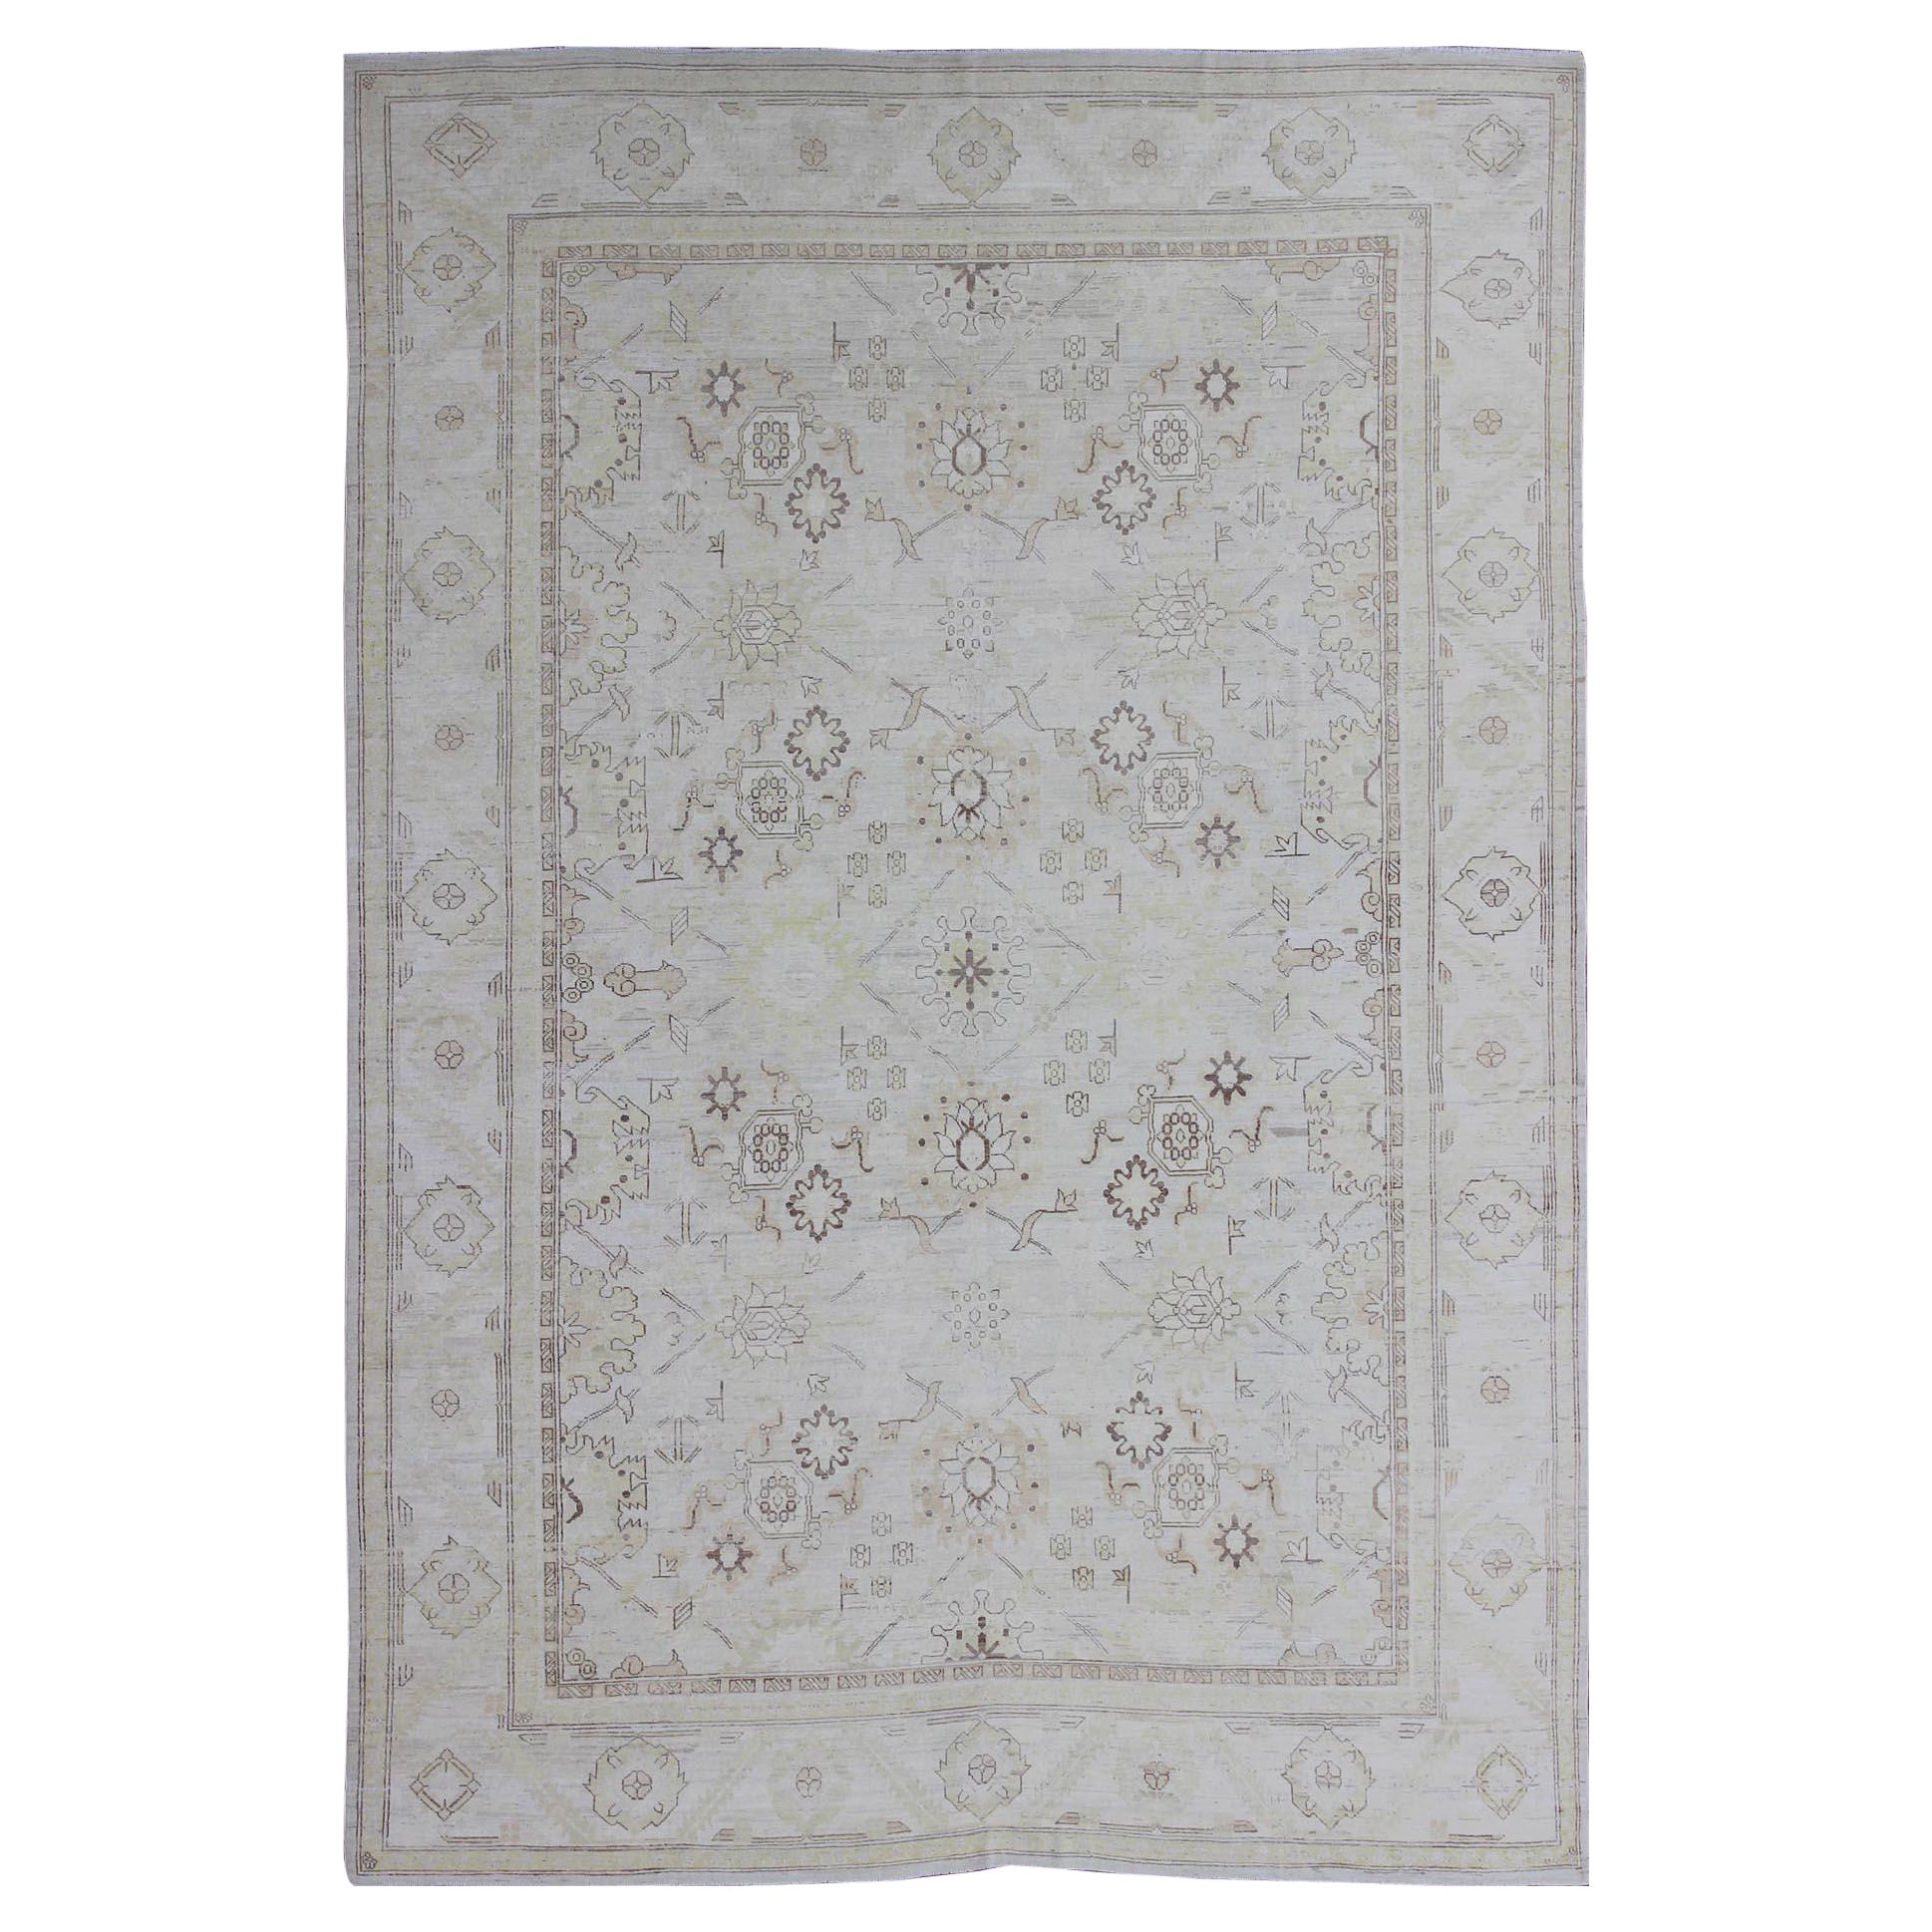 Very Fine Transitional Rug with Stylized Geometric Motifs in Cream & Soft Yellow